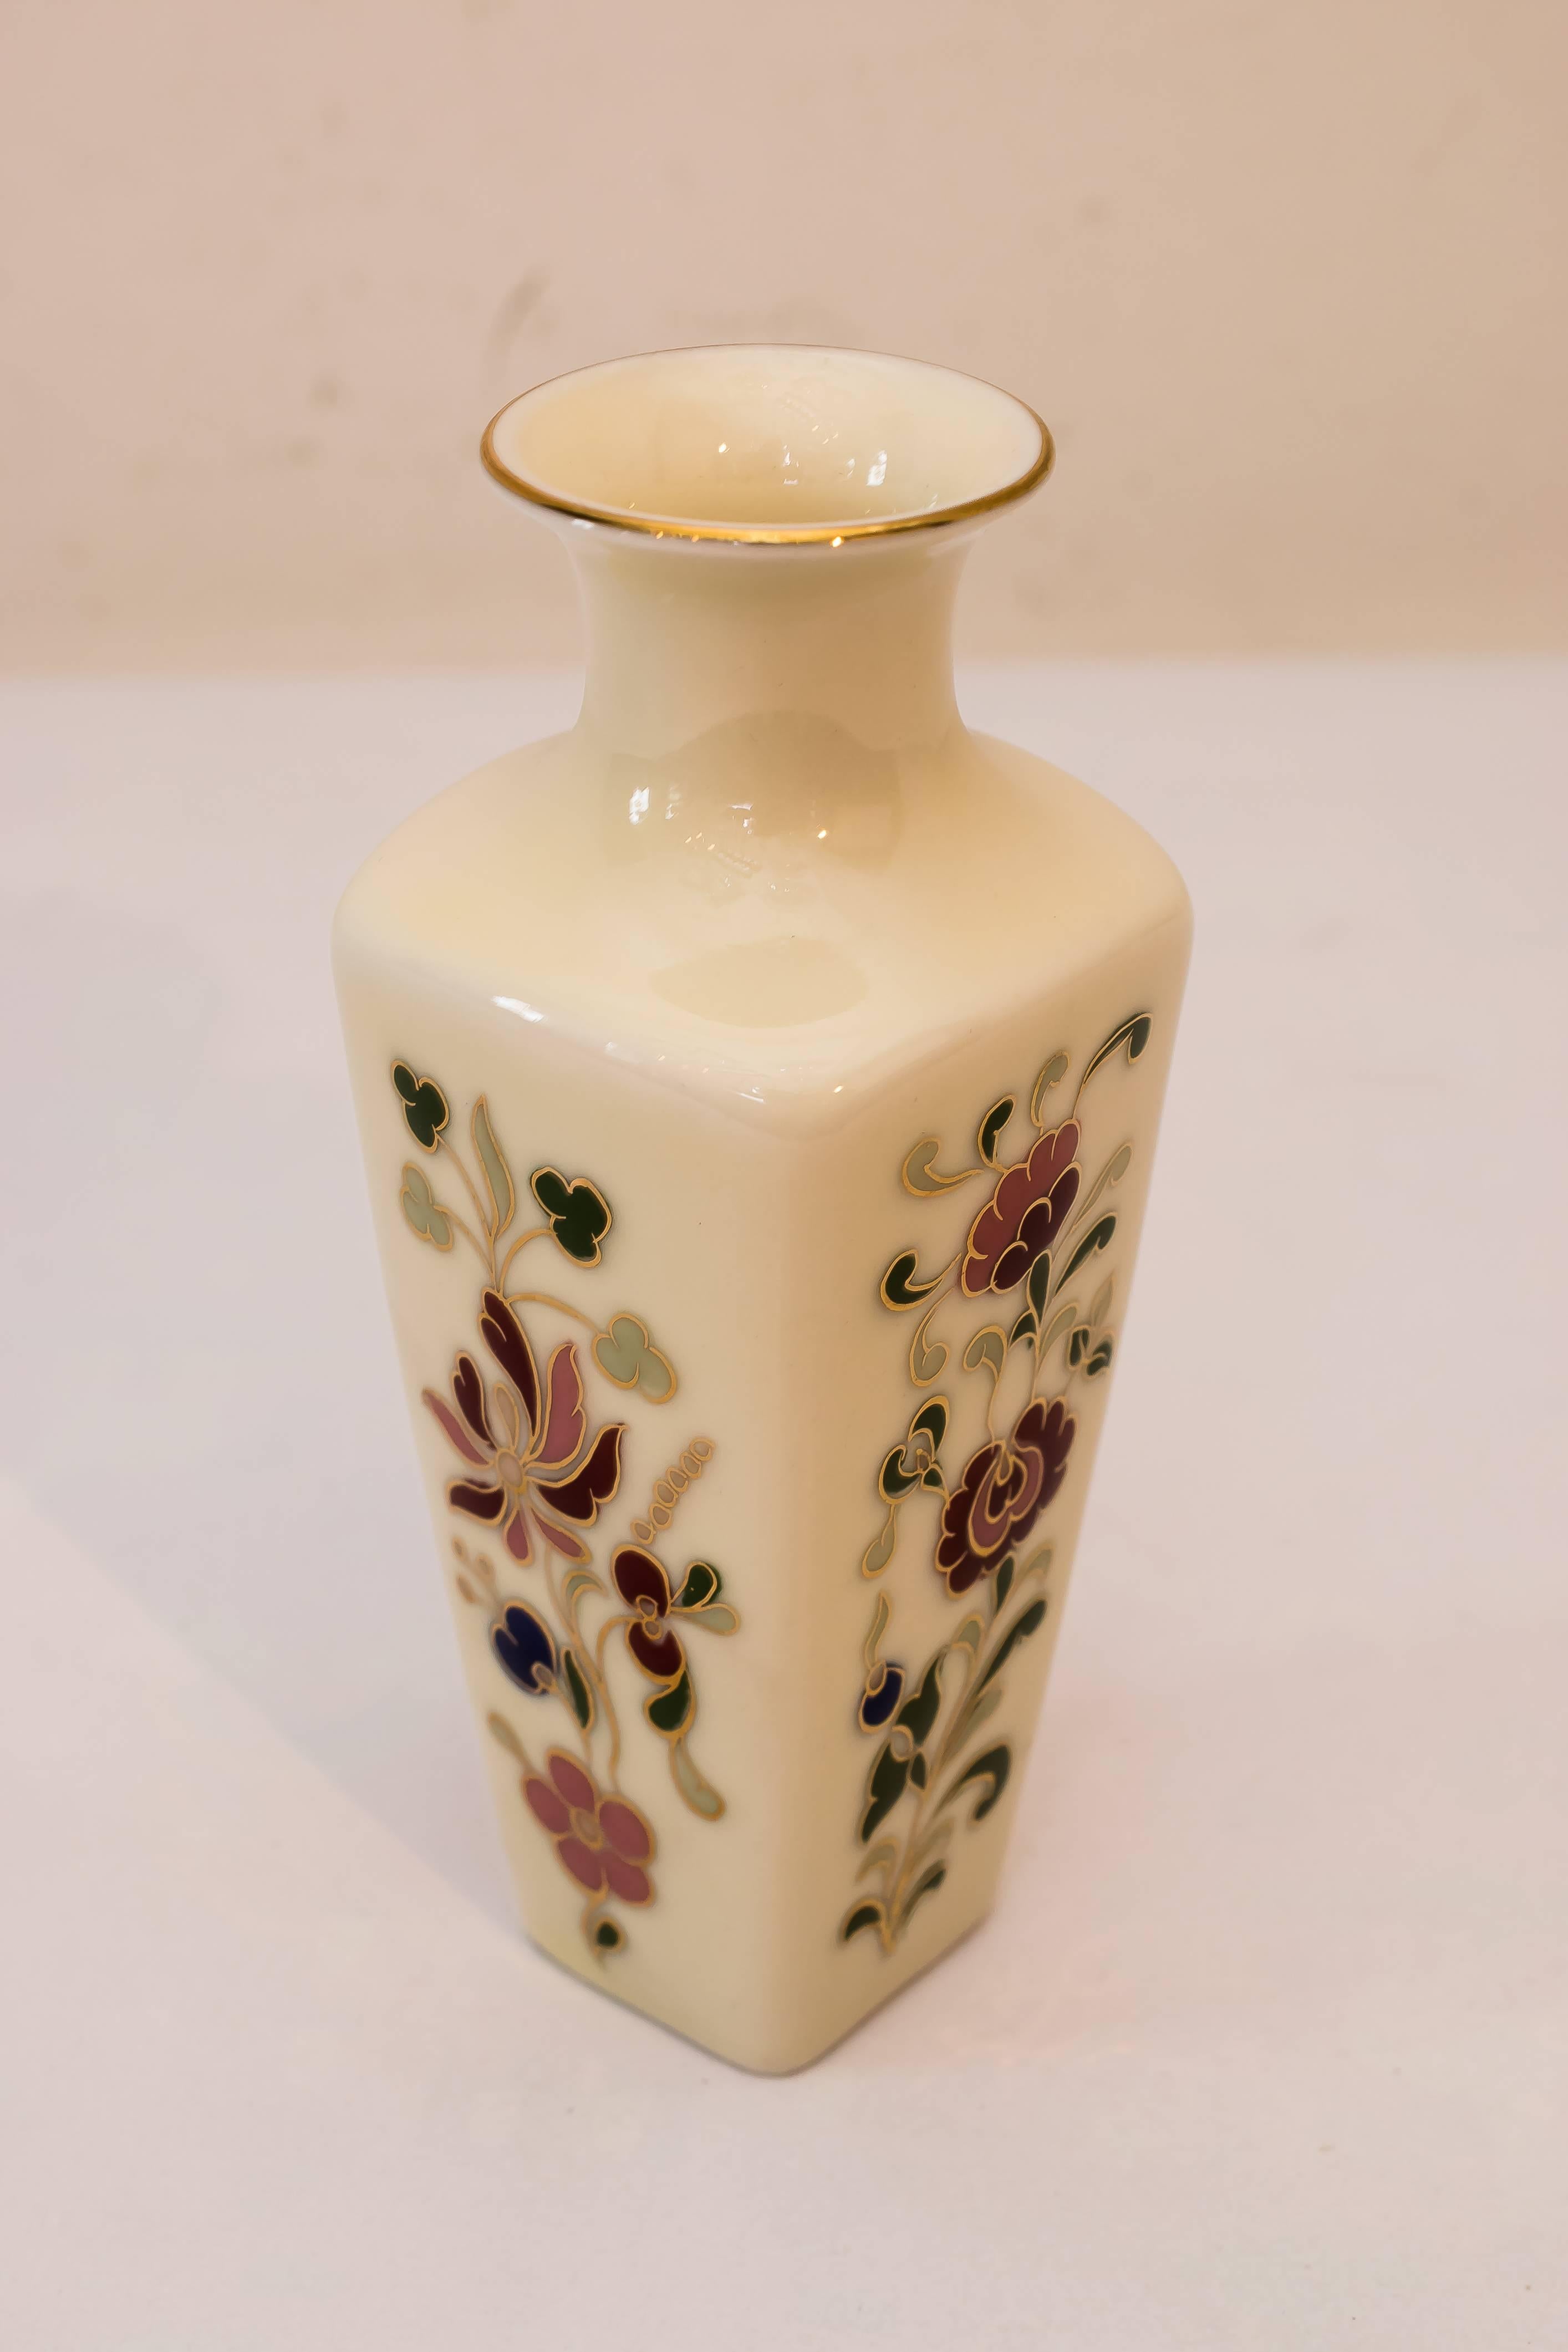 Small vase by Zsolnay Hungary ceramic
Original condition.